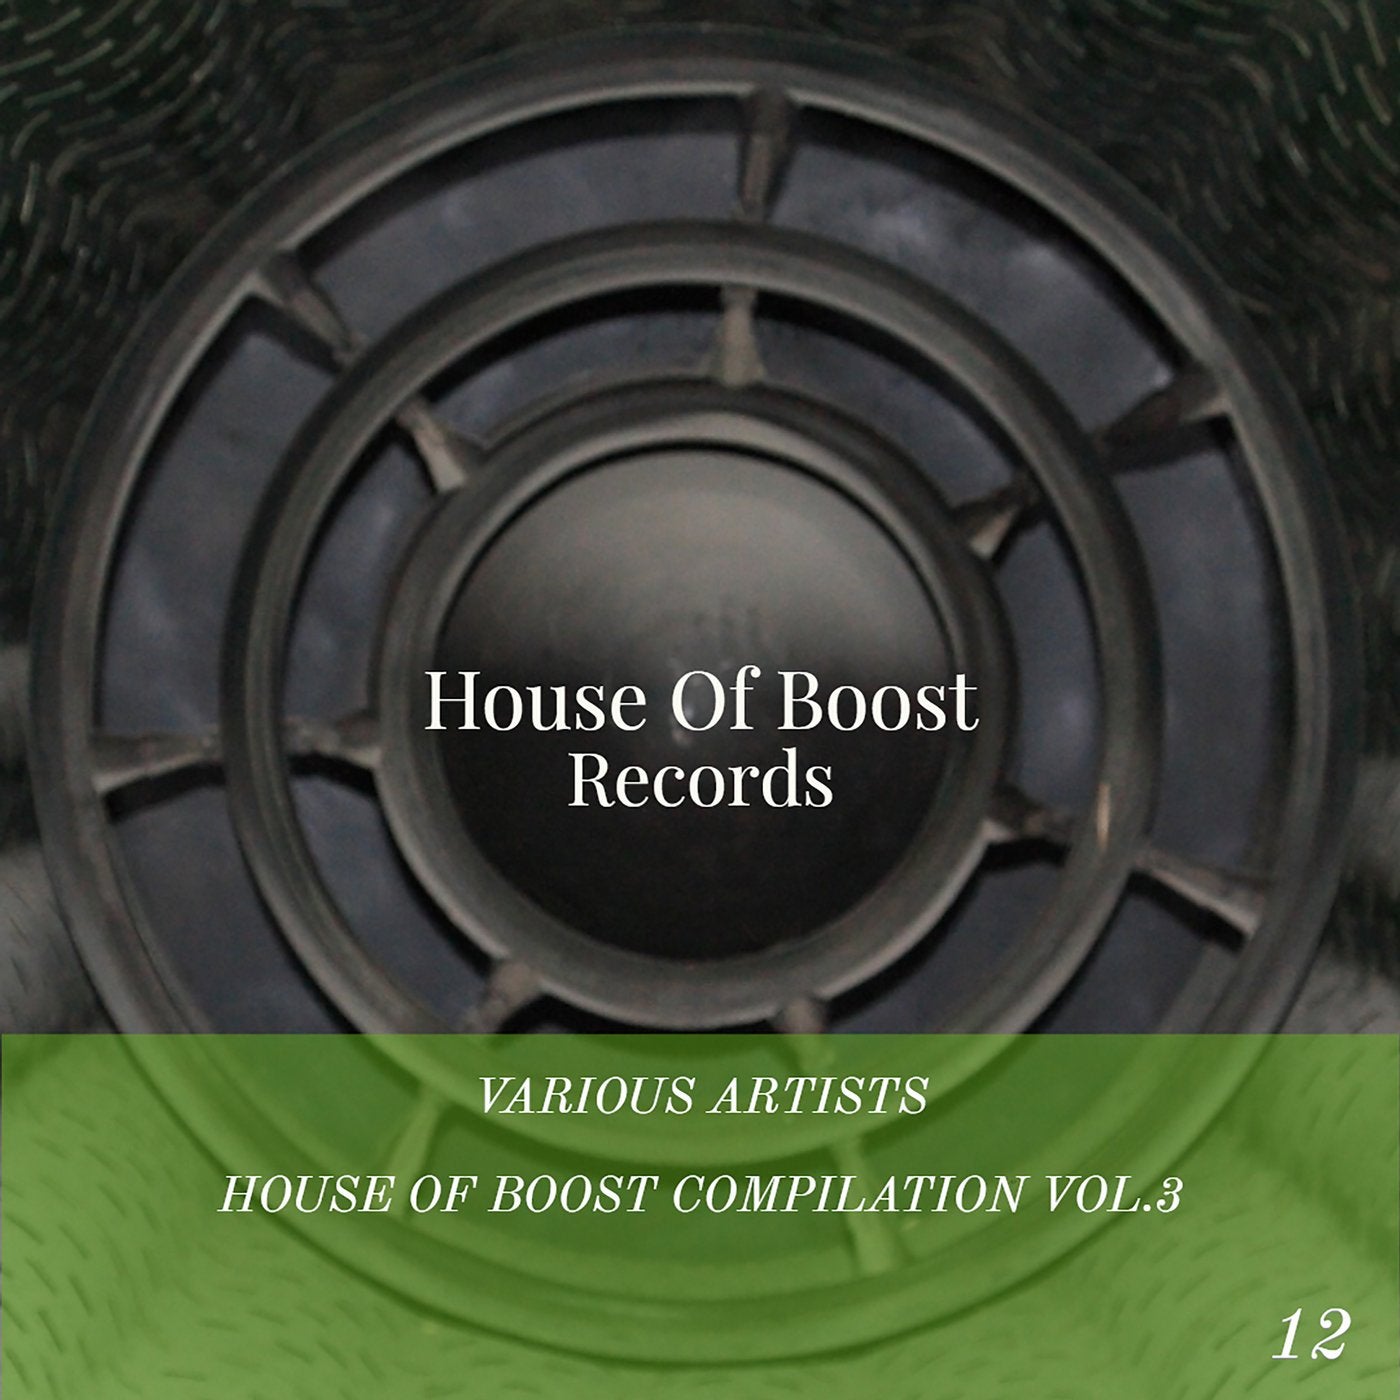 House Of Boost Compilation Vol.3